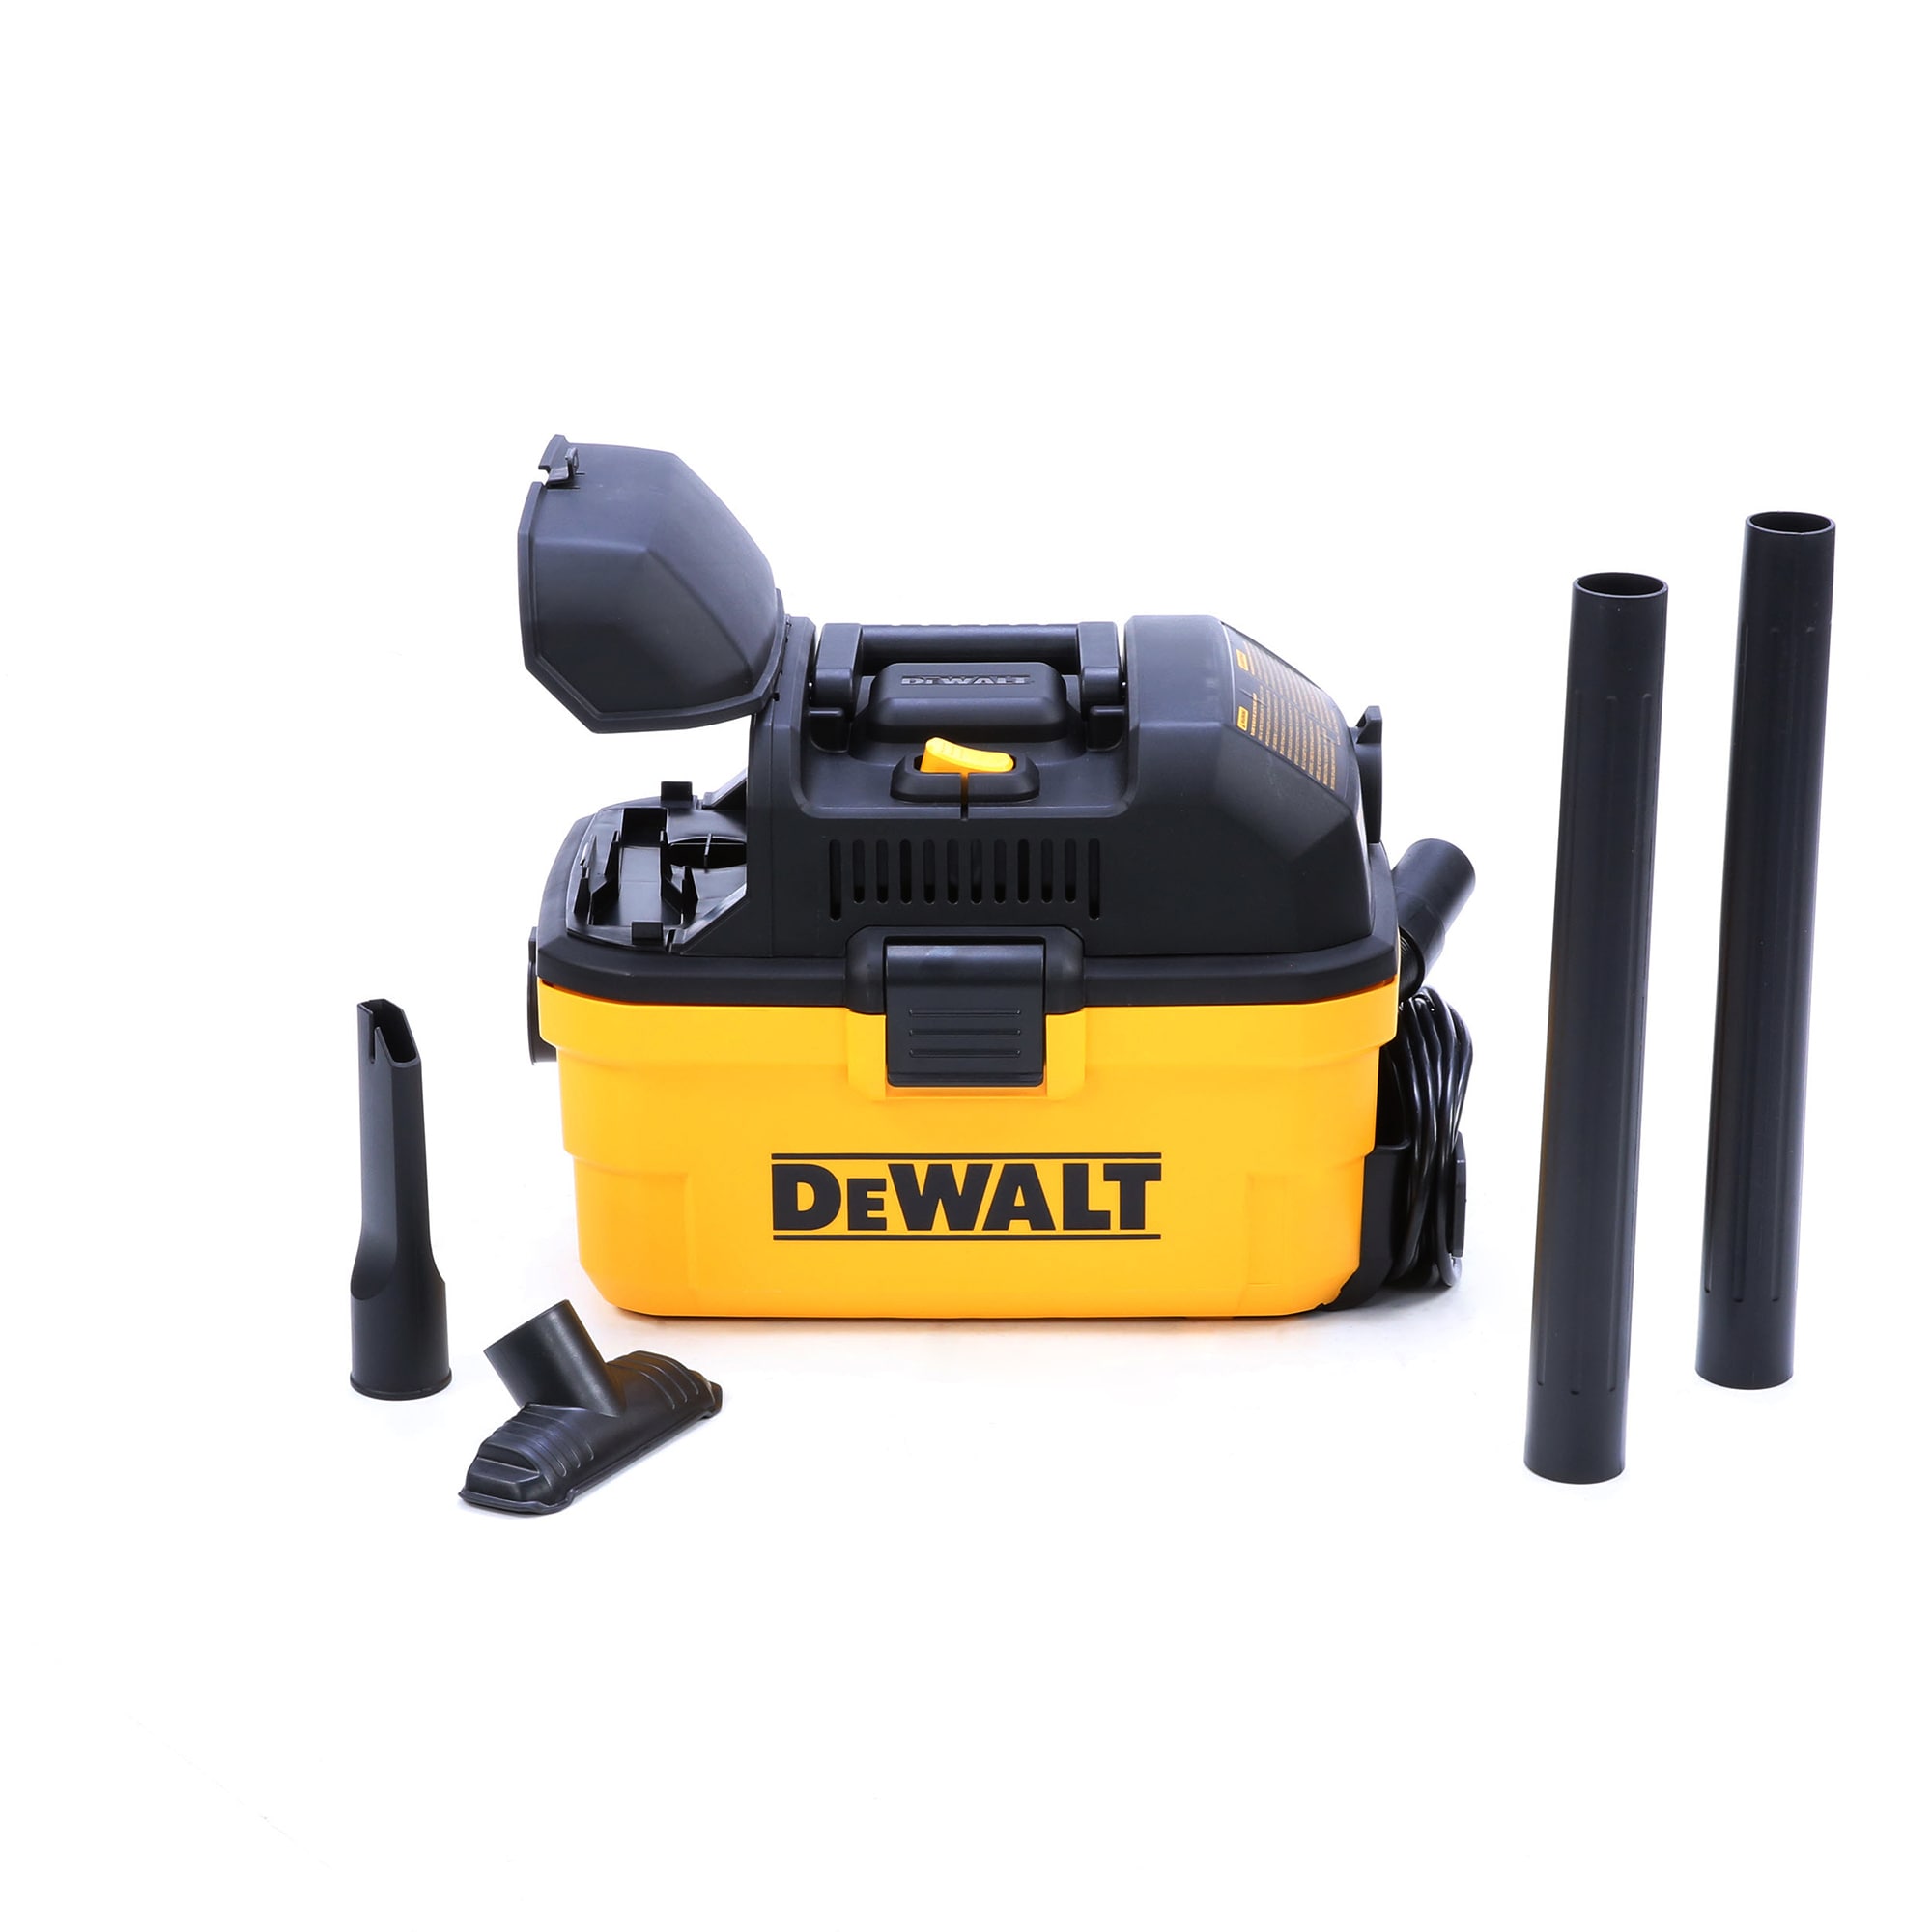 DEWALT 4-Gallons 5-HP Corded Wet/Dry Shop Vacuum with Accessories Included  in the Shop Vacuums department at